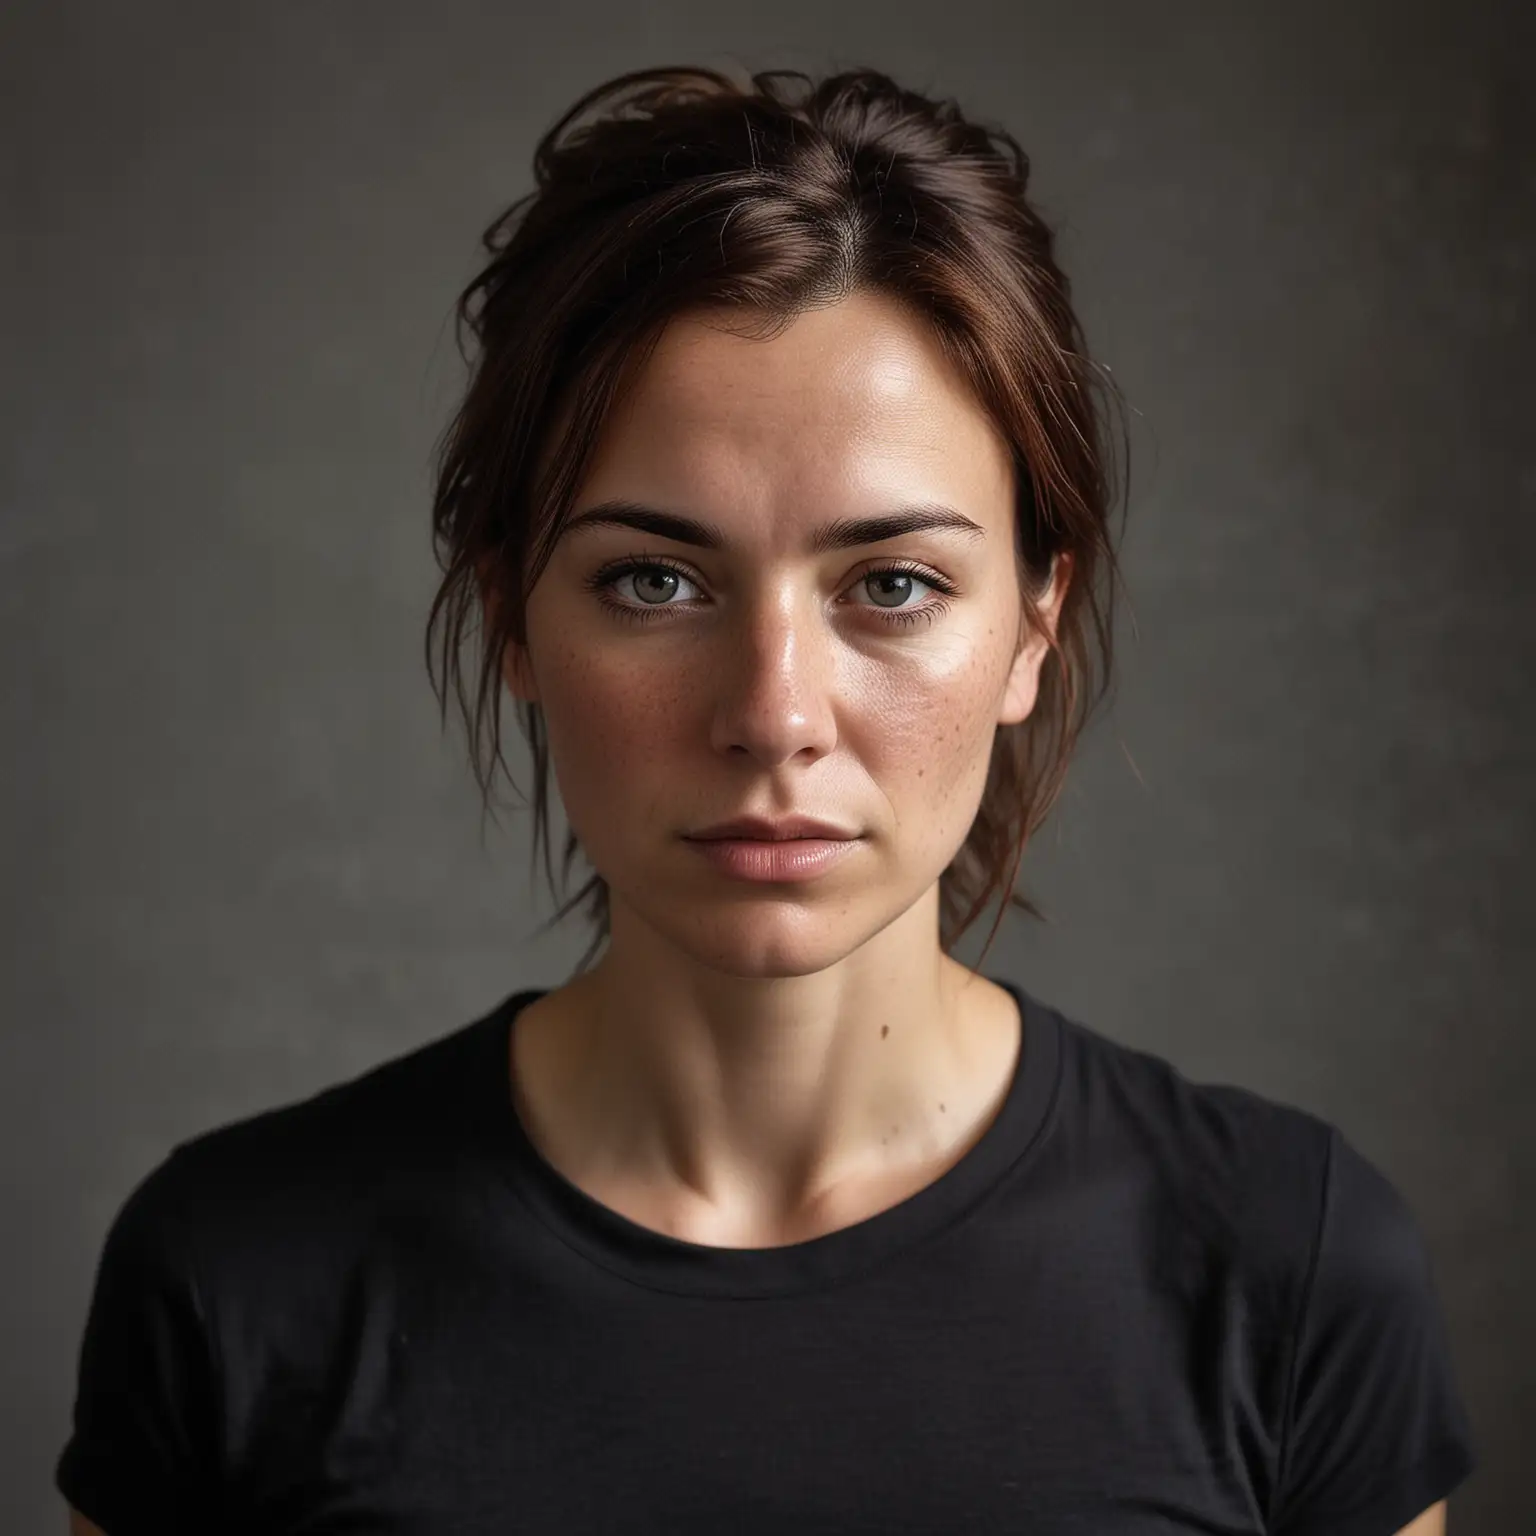 Serious Woman in Black TShirt and Grey Trousers with Freckles